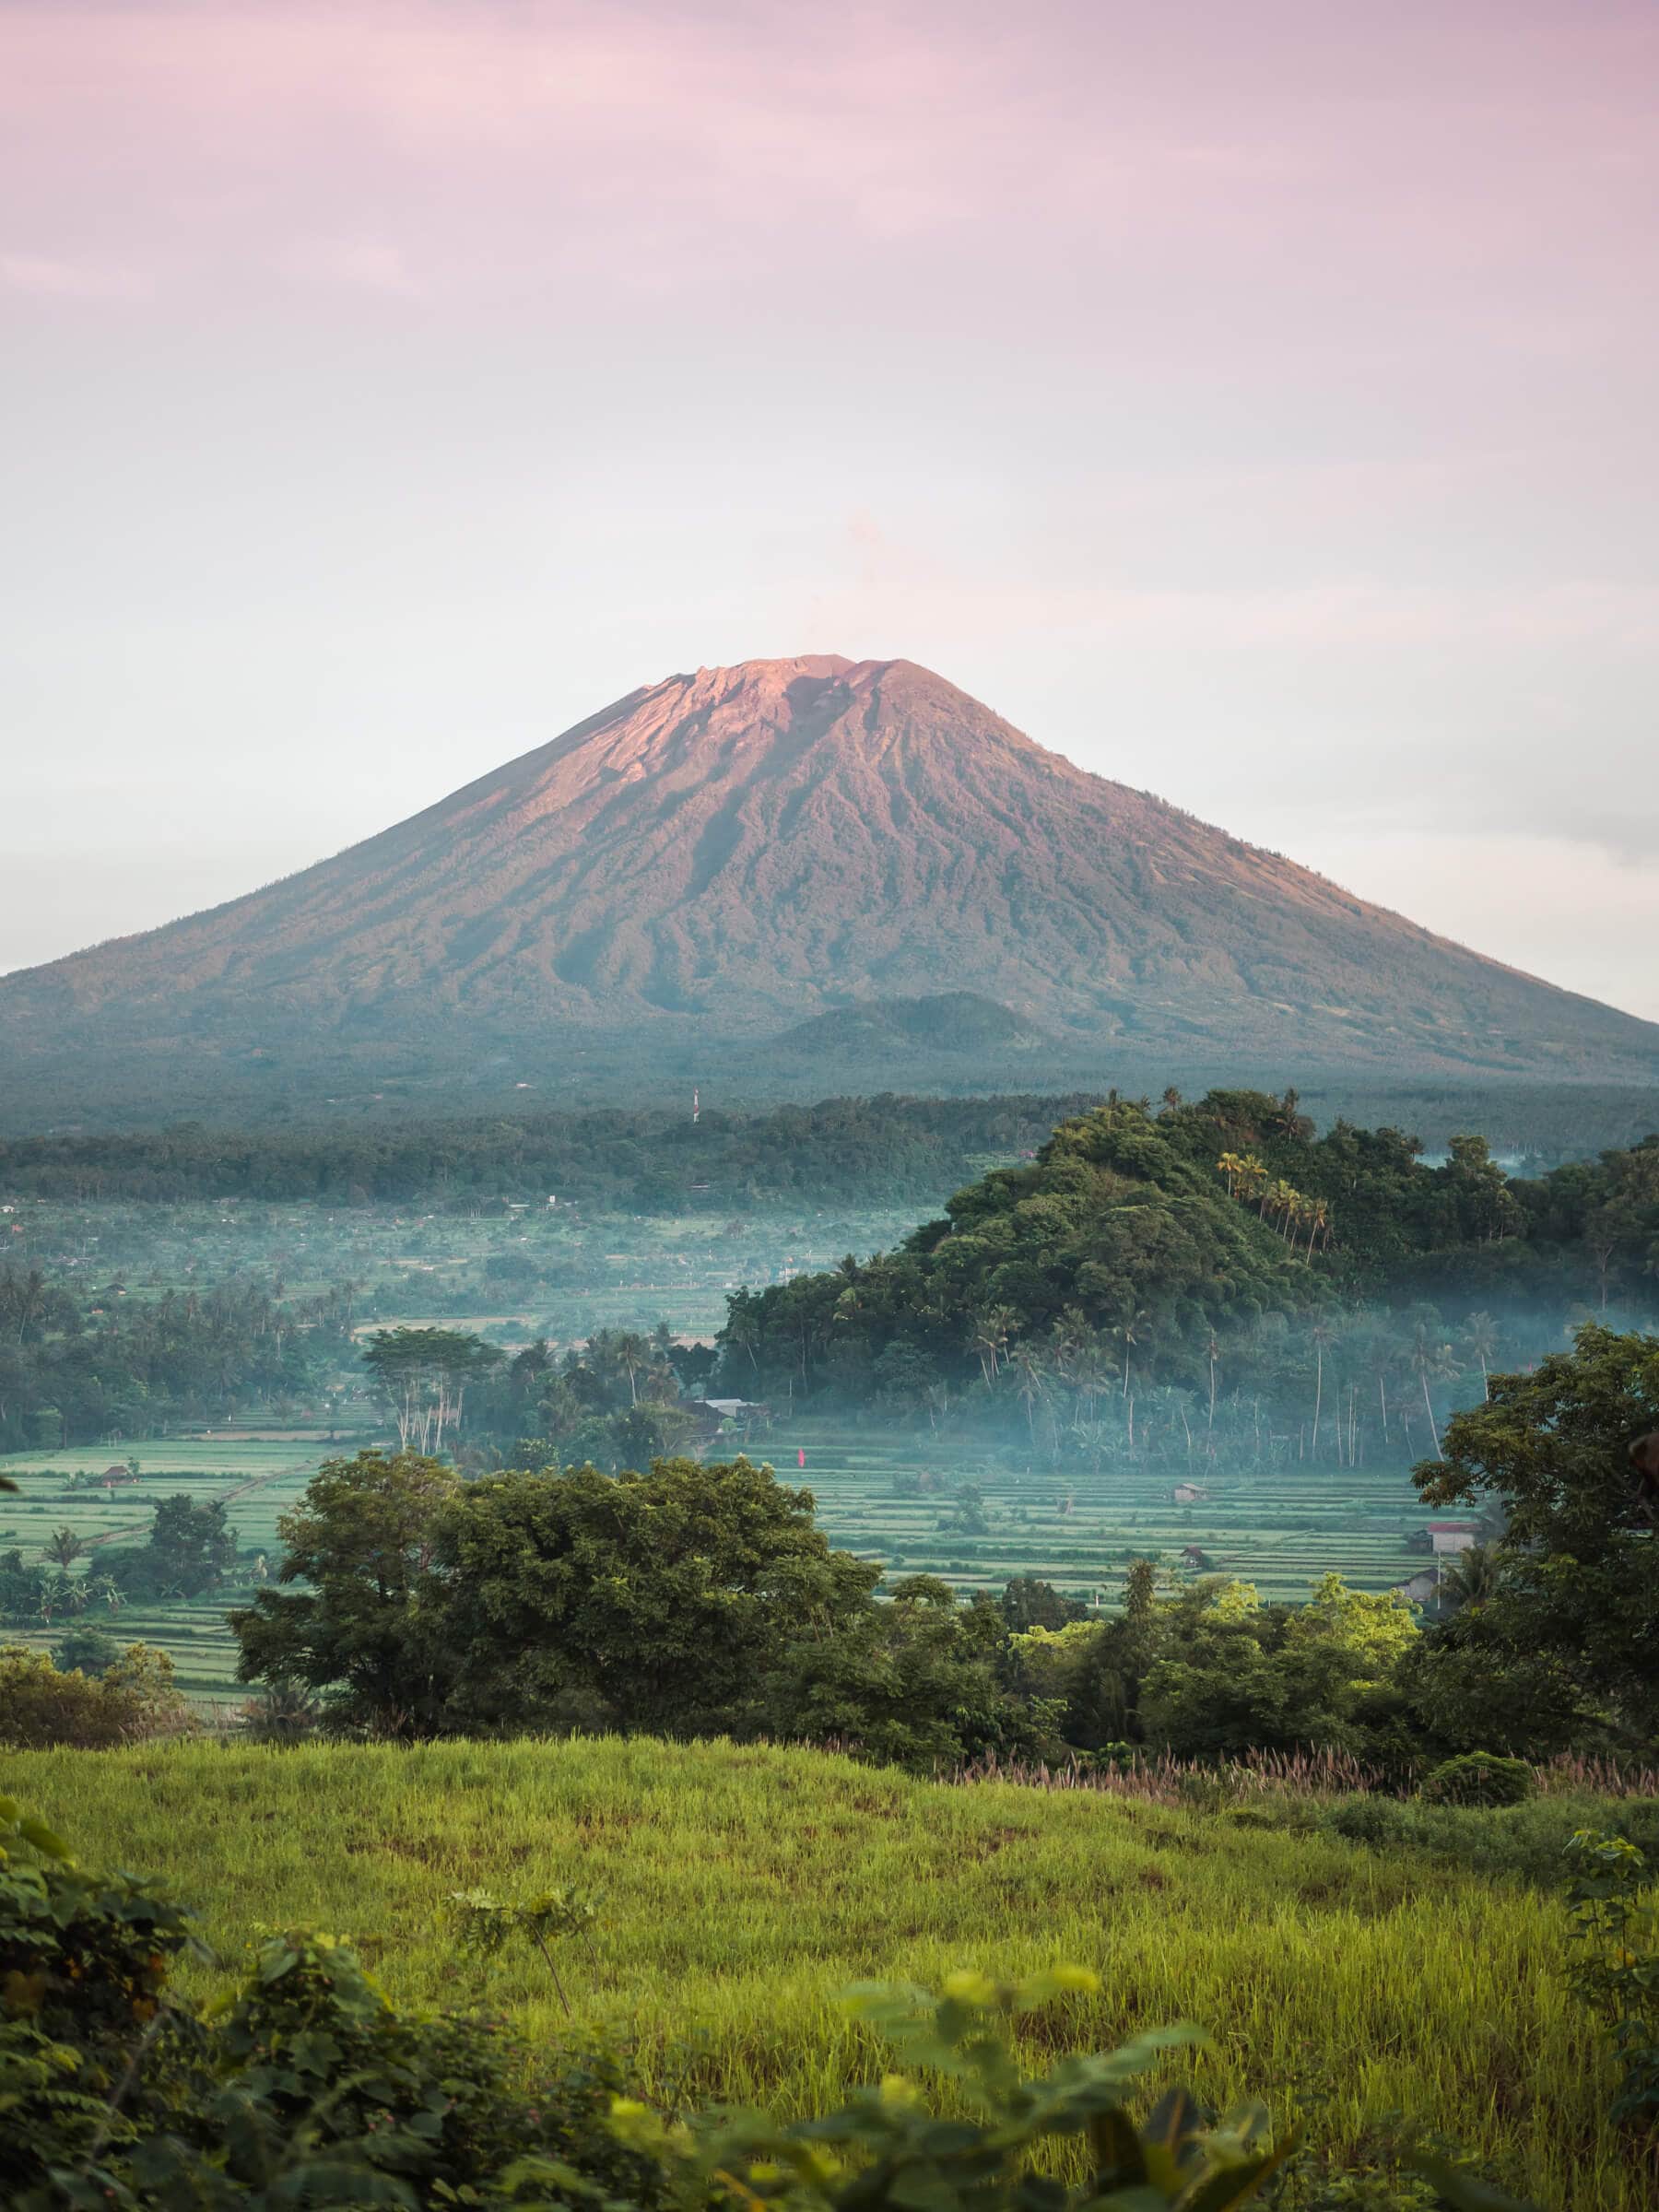 View of Mount Agung volcano seen from Bukit Cinta viewpoint in East Bali at sunrise against a pink sky and lush green rice fields in the foreground.